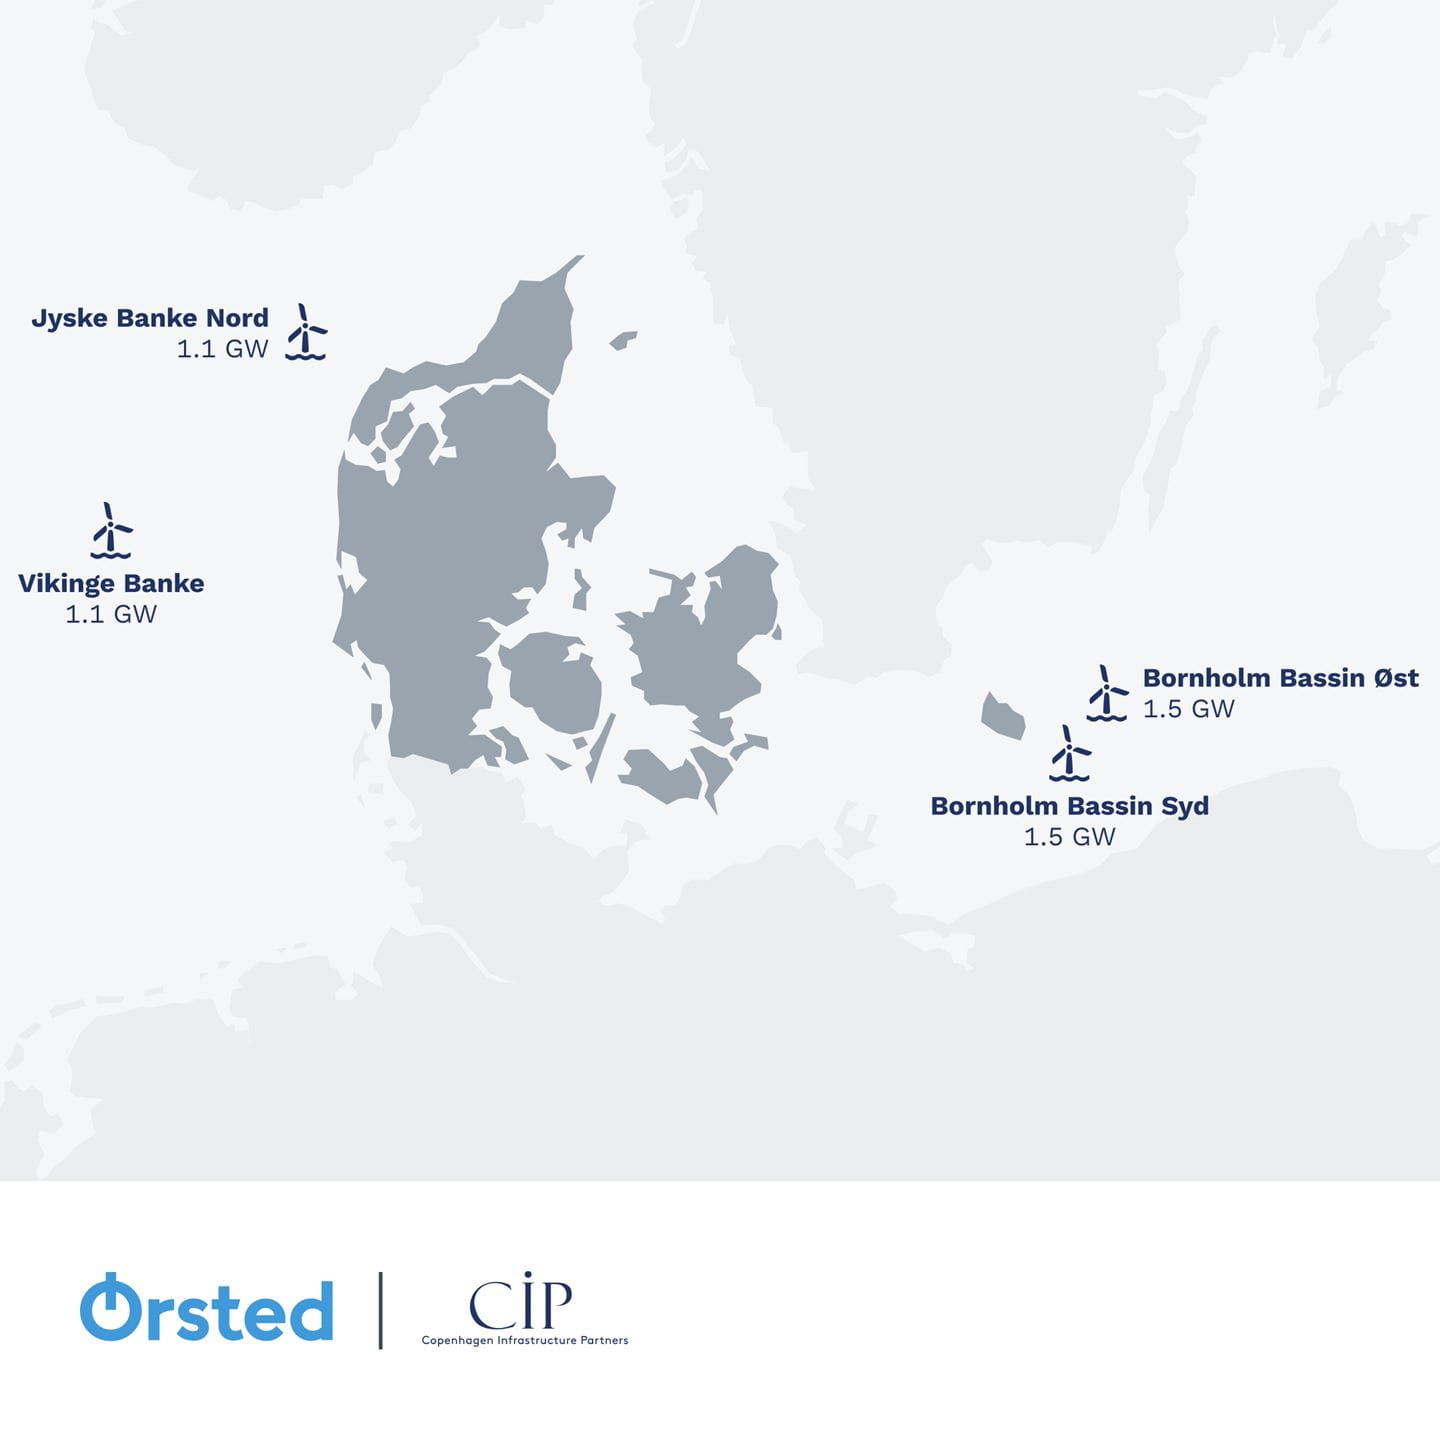 Ørsted and CIP partnership to more than double Denmark's offshore wind capacity